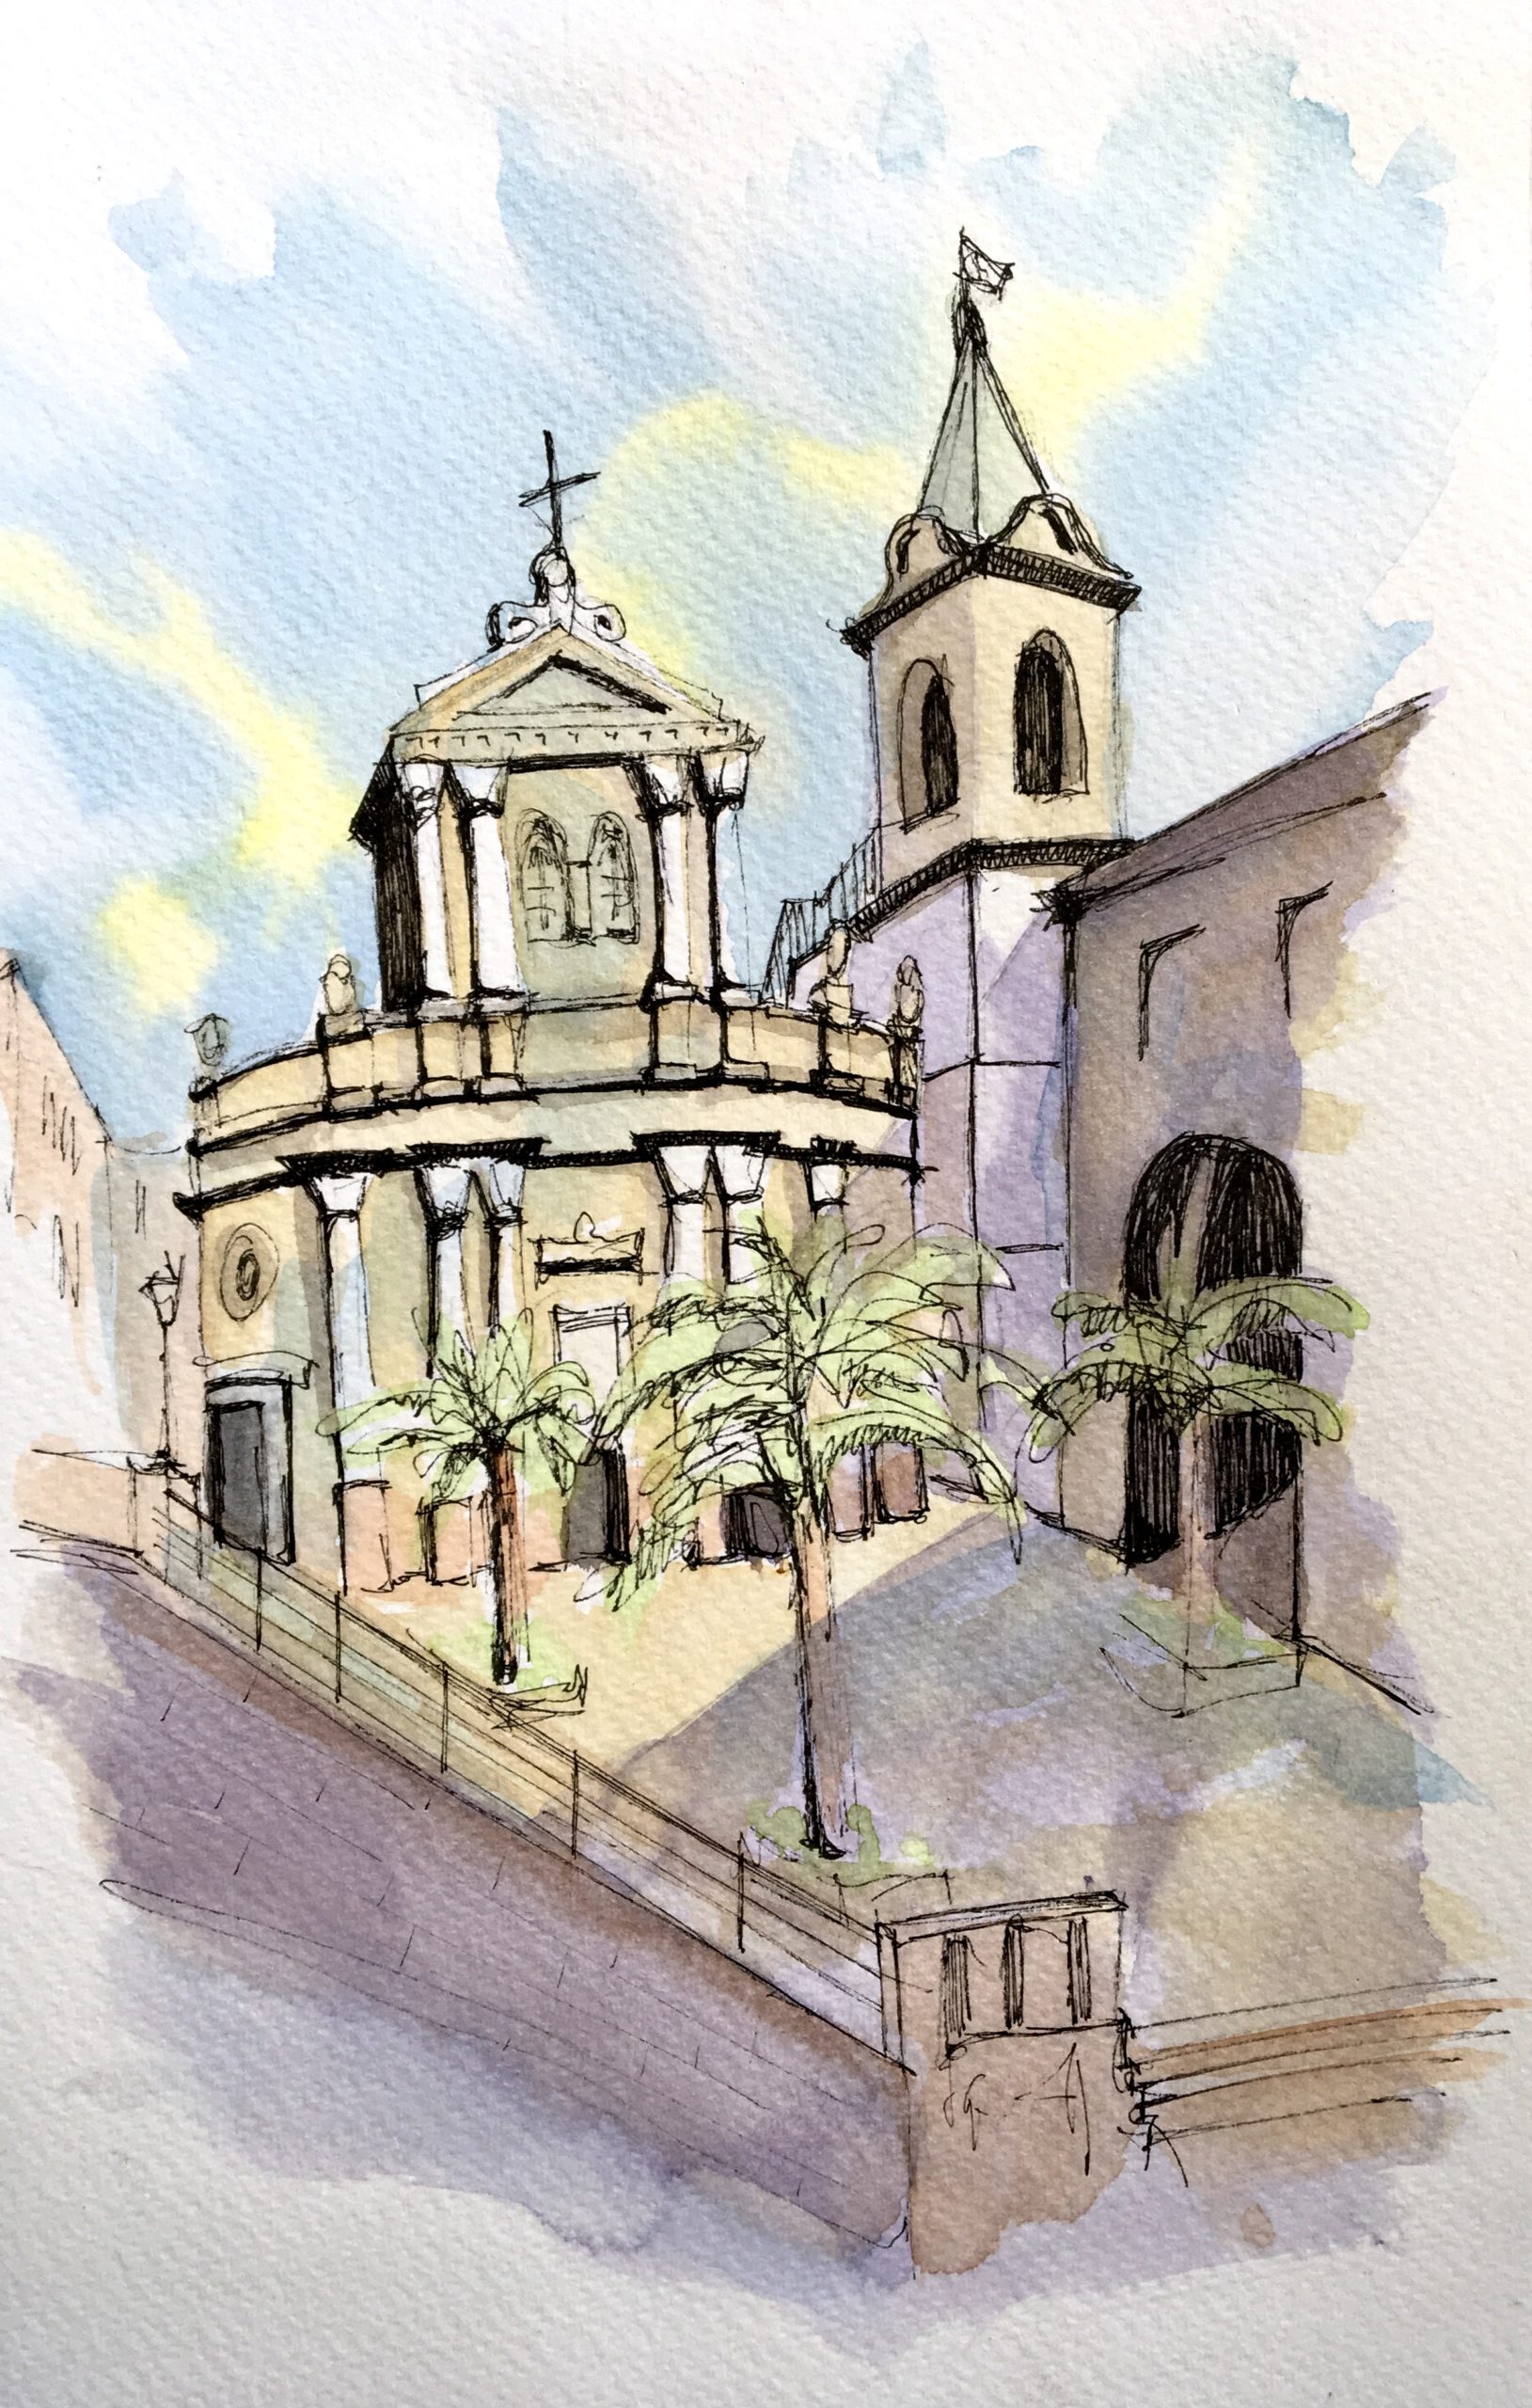 Painting of the Church of Our Lady in Sambuca di Sicilia